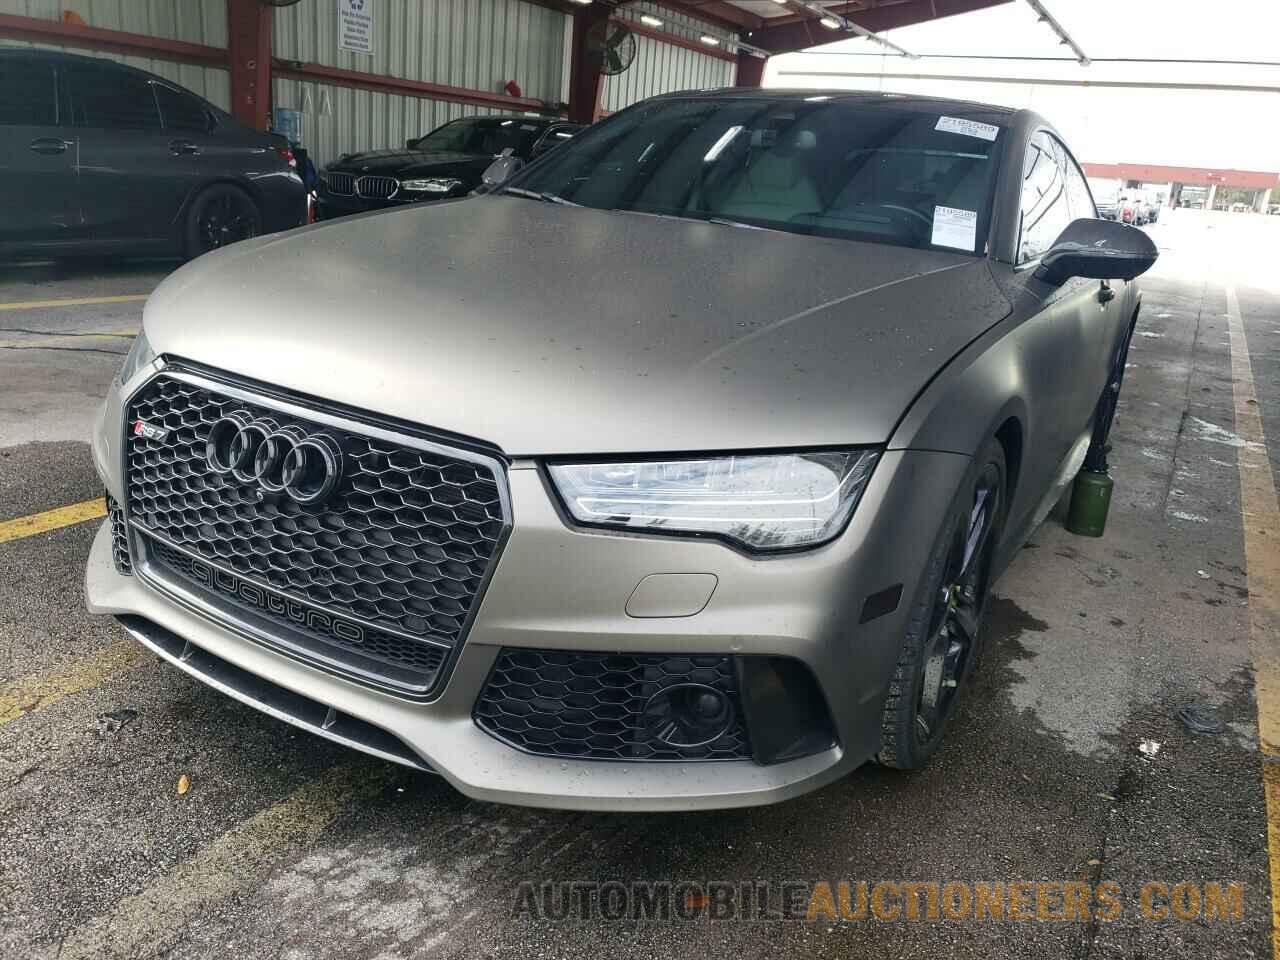 WUAW2AFC1GN900840 Audi RS 7 2016